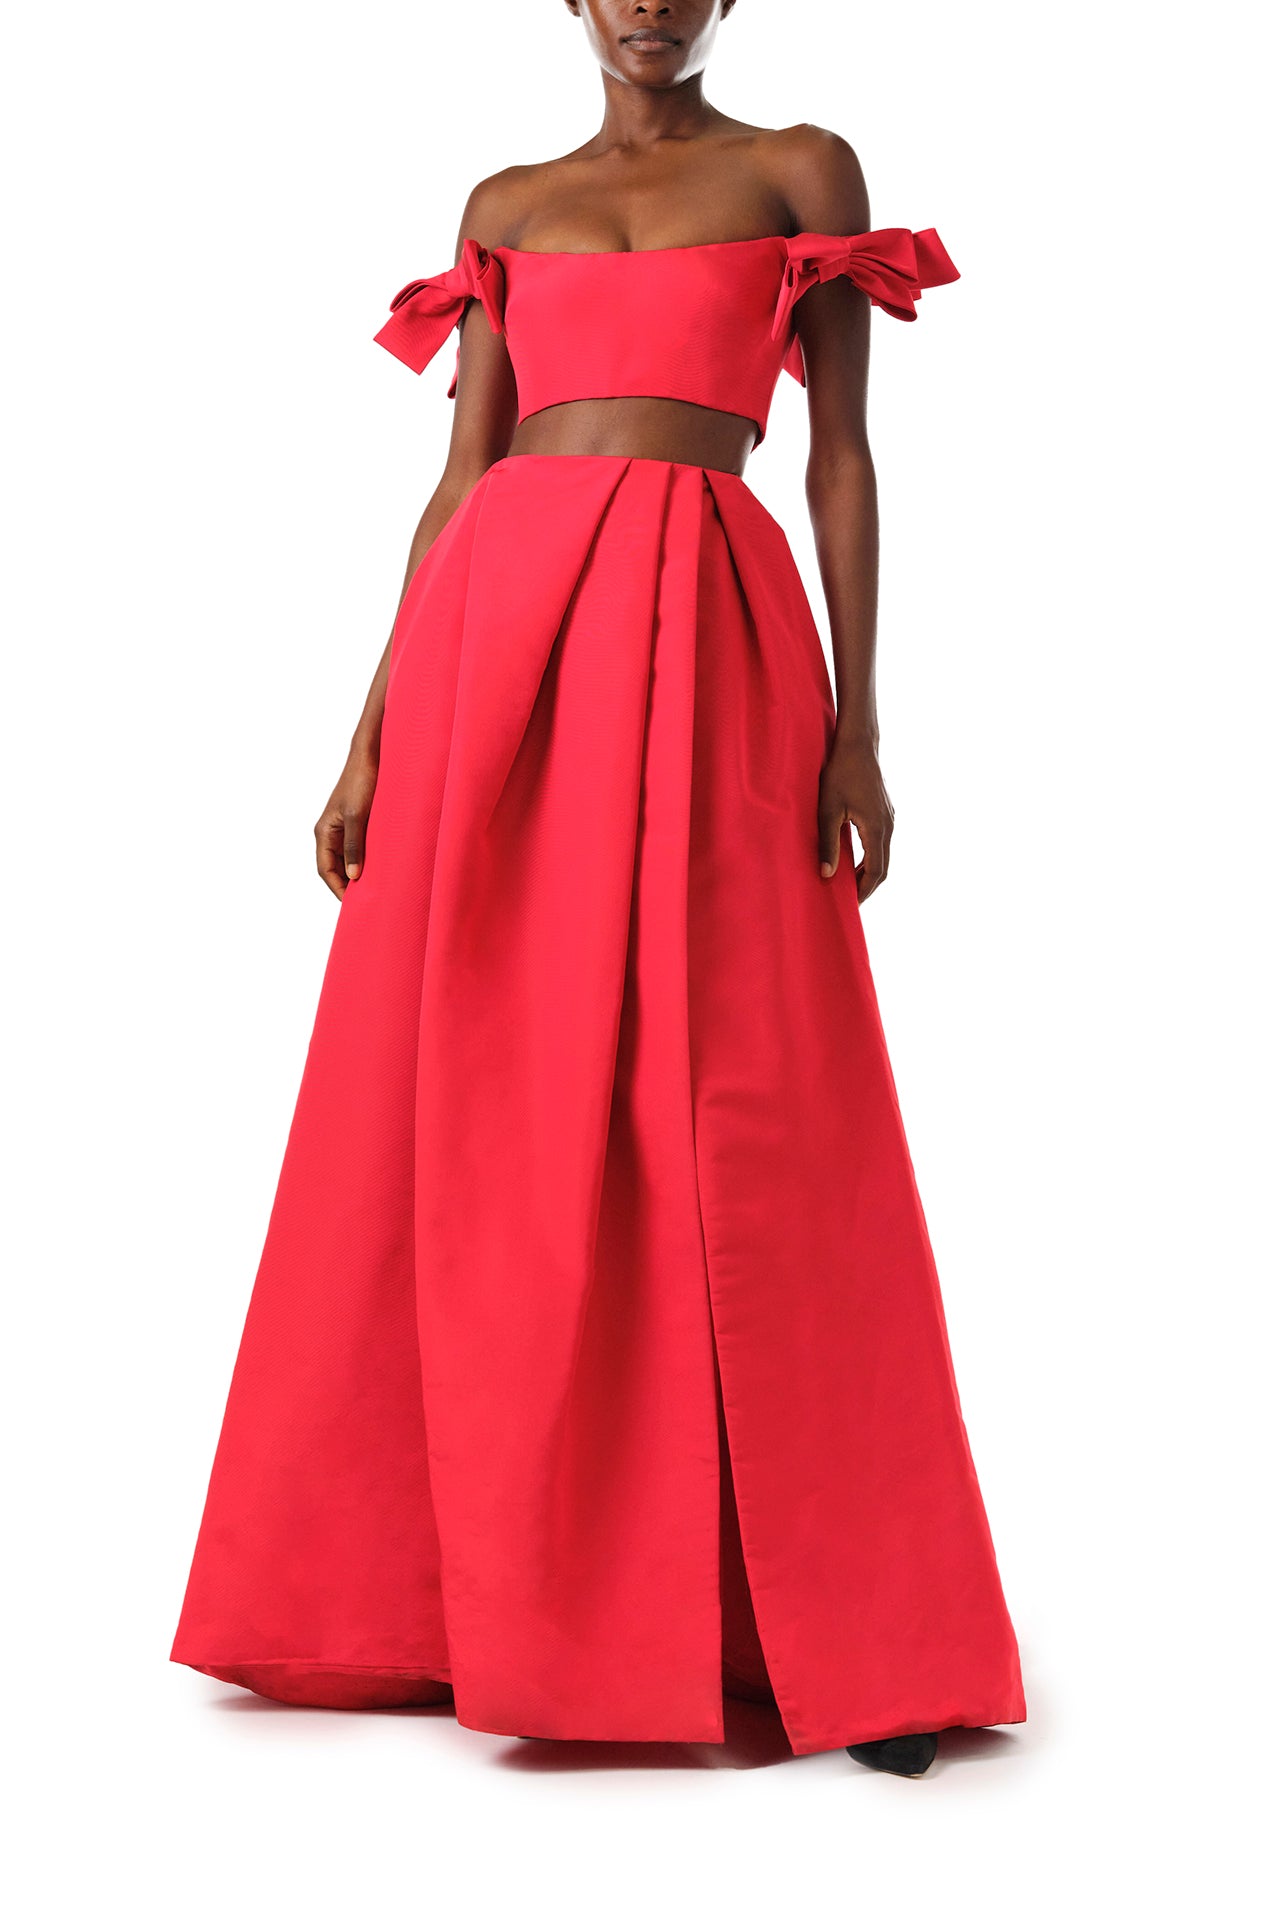 Monique Lhuillier Fall 2024 scarlet red faille pleated ballgown skirt with high front slit and pockets - front.